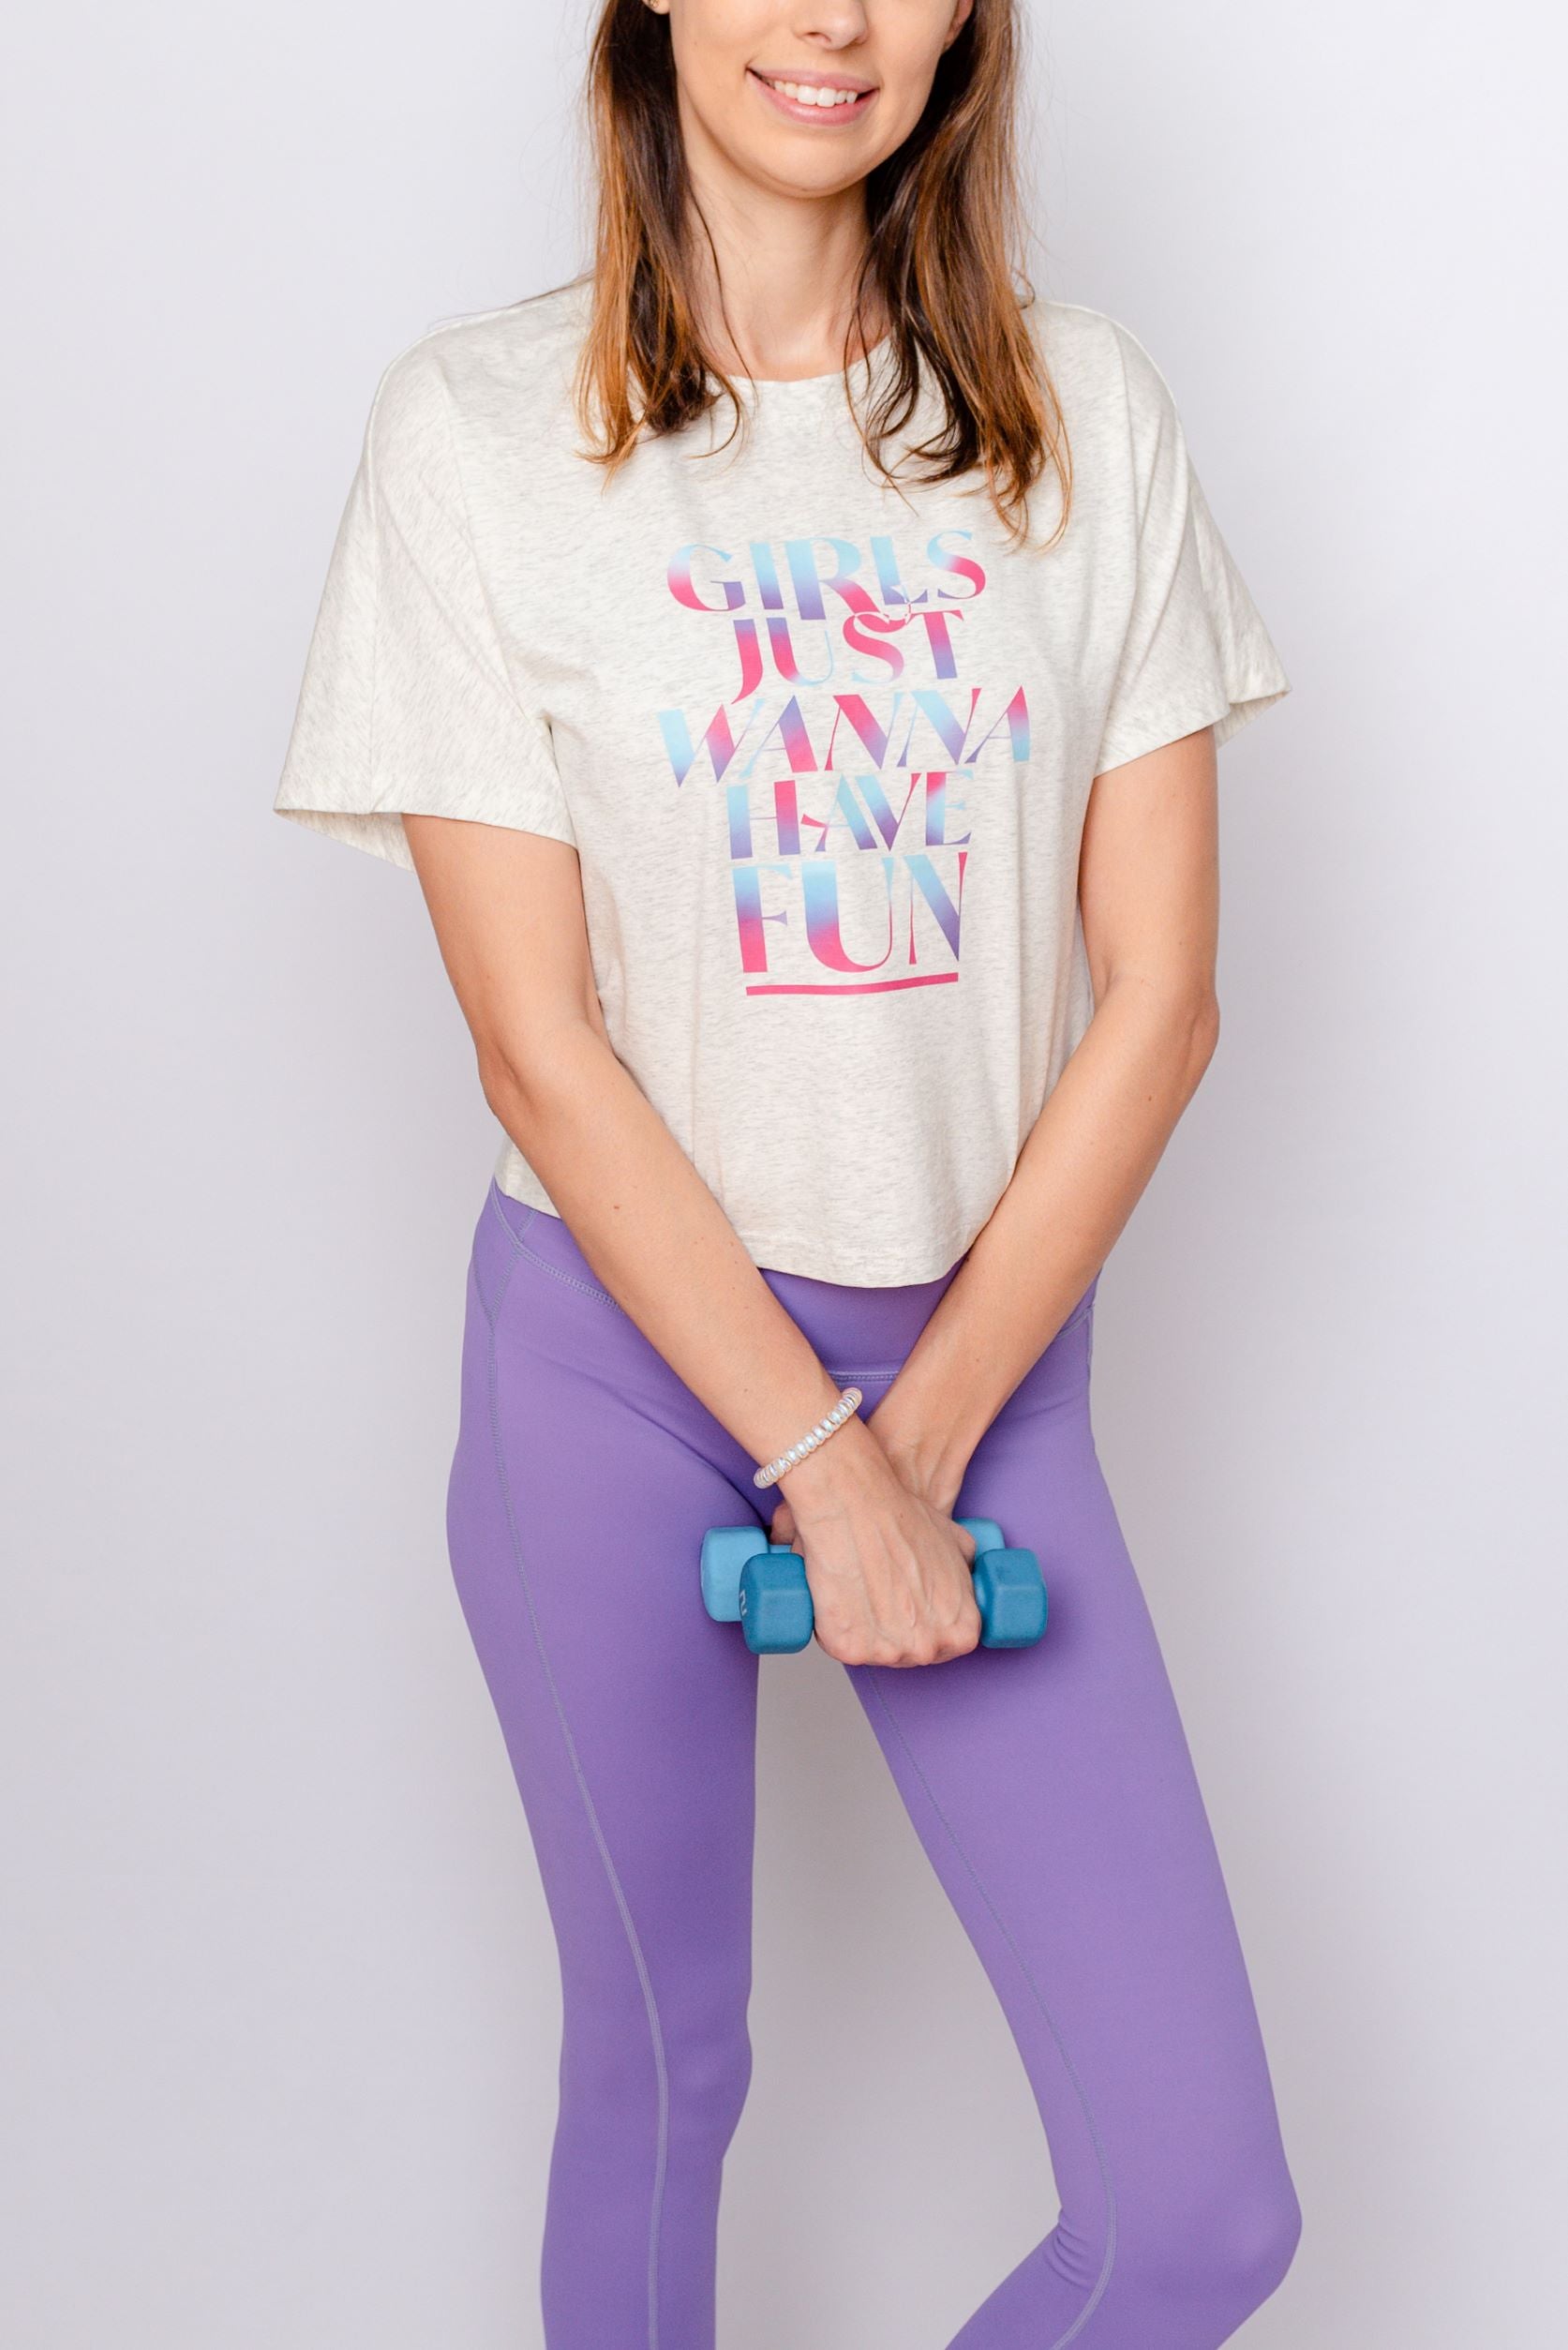 Girls Just Wanna Have Fun: Women's Mommy and Me Activewear Set –  mypetiteandme